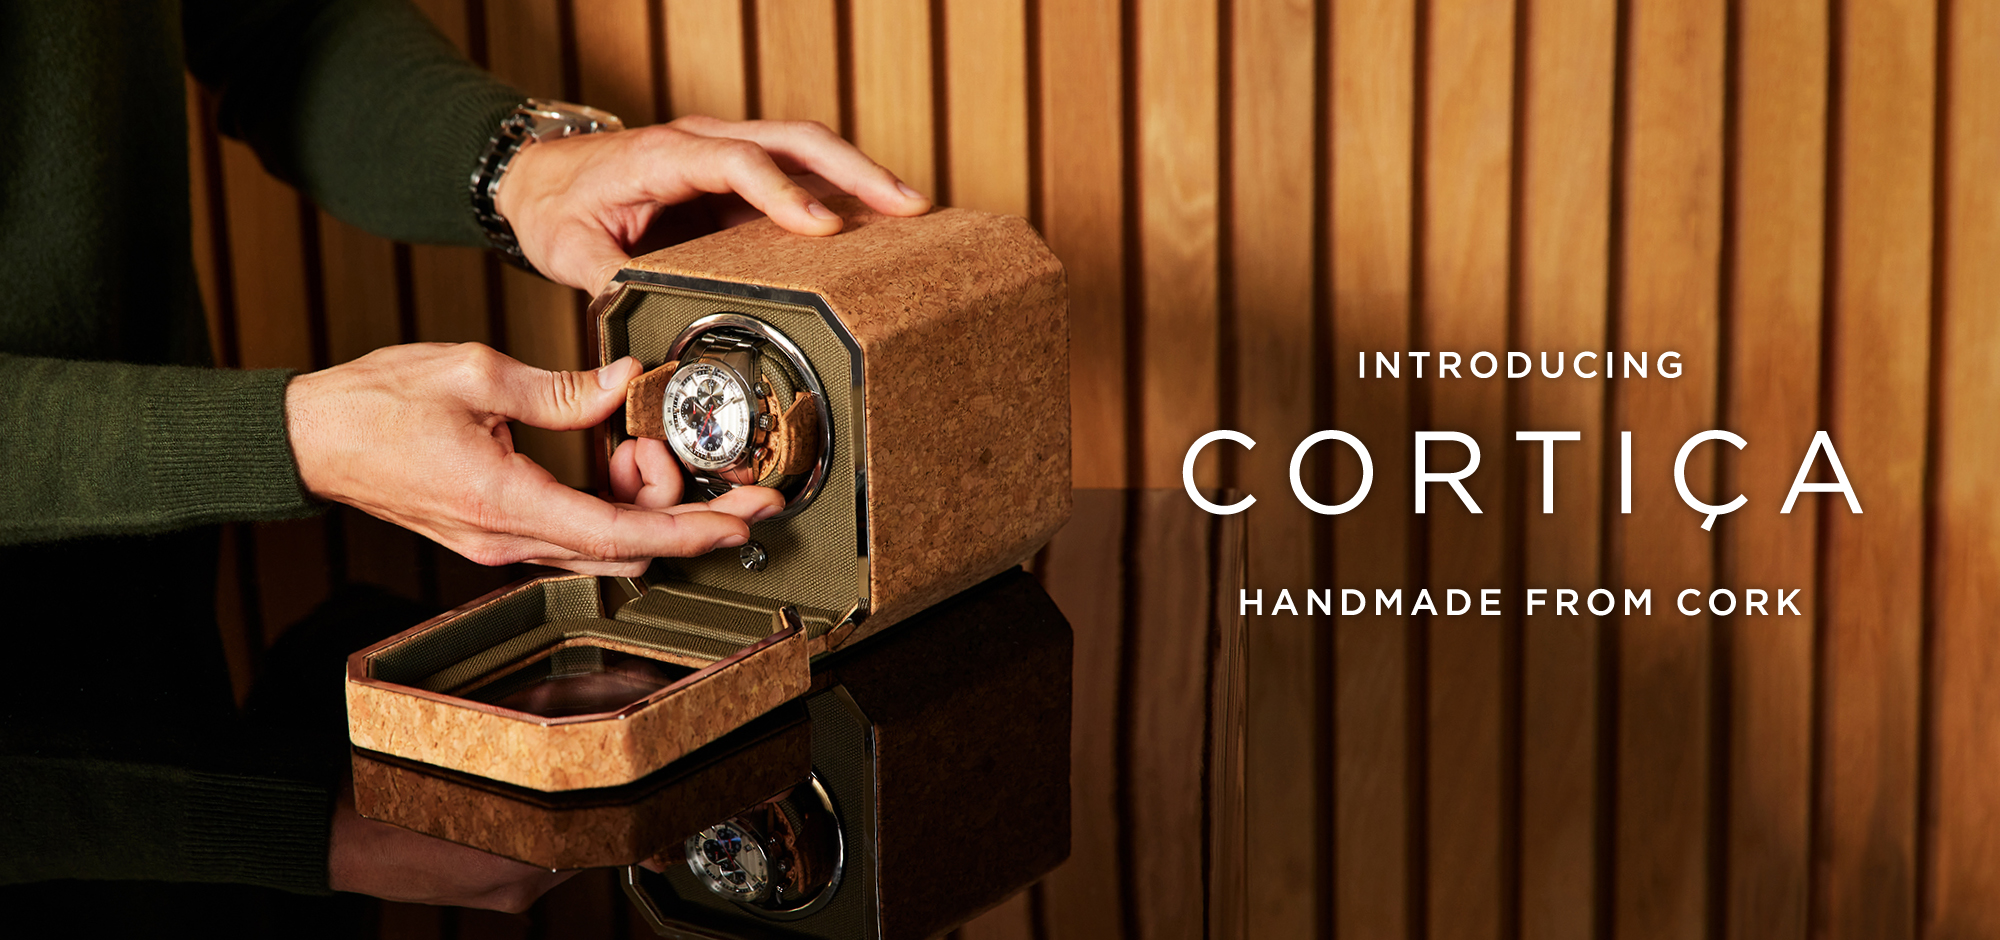 Introducing Cortica handmade from cork 